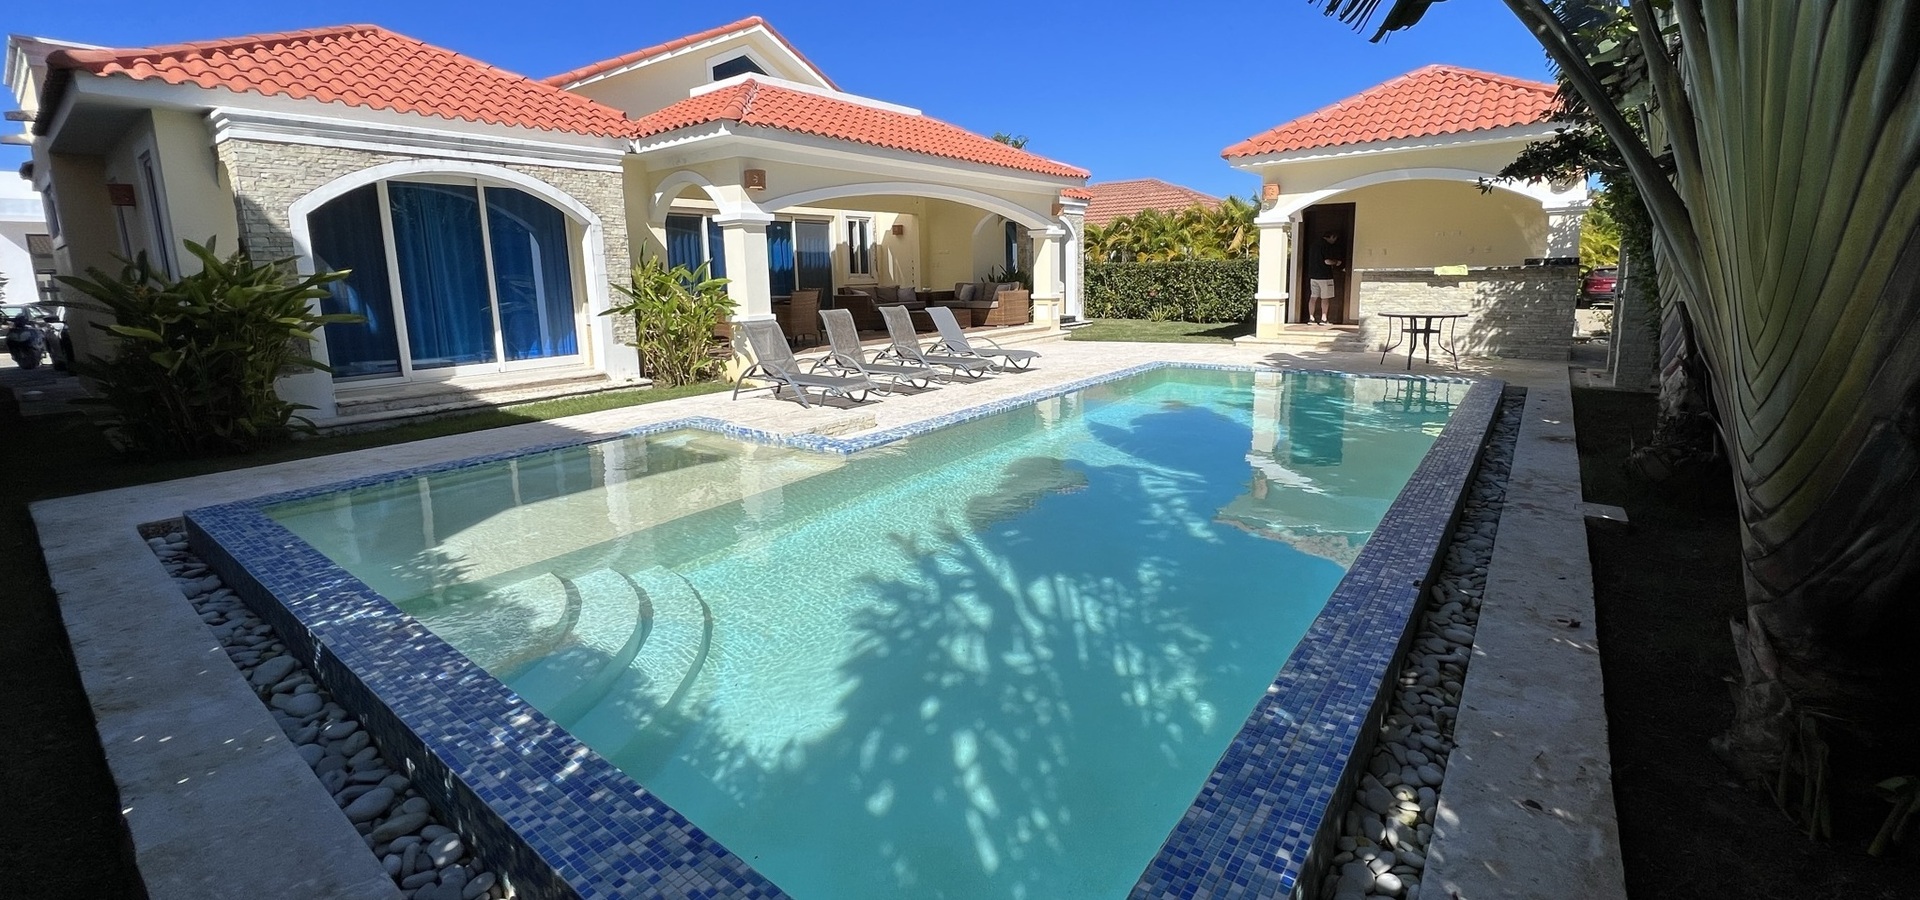 #0 Villa with 3 bedrooms in gated oceanfront community